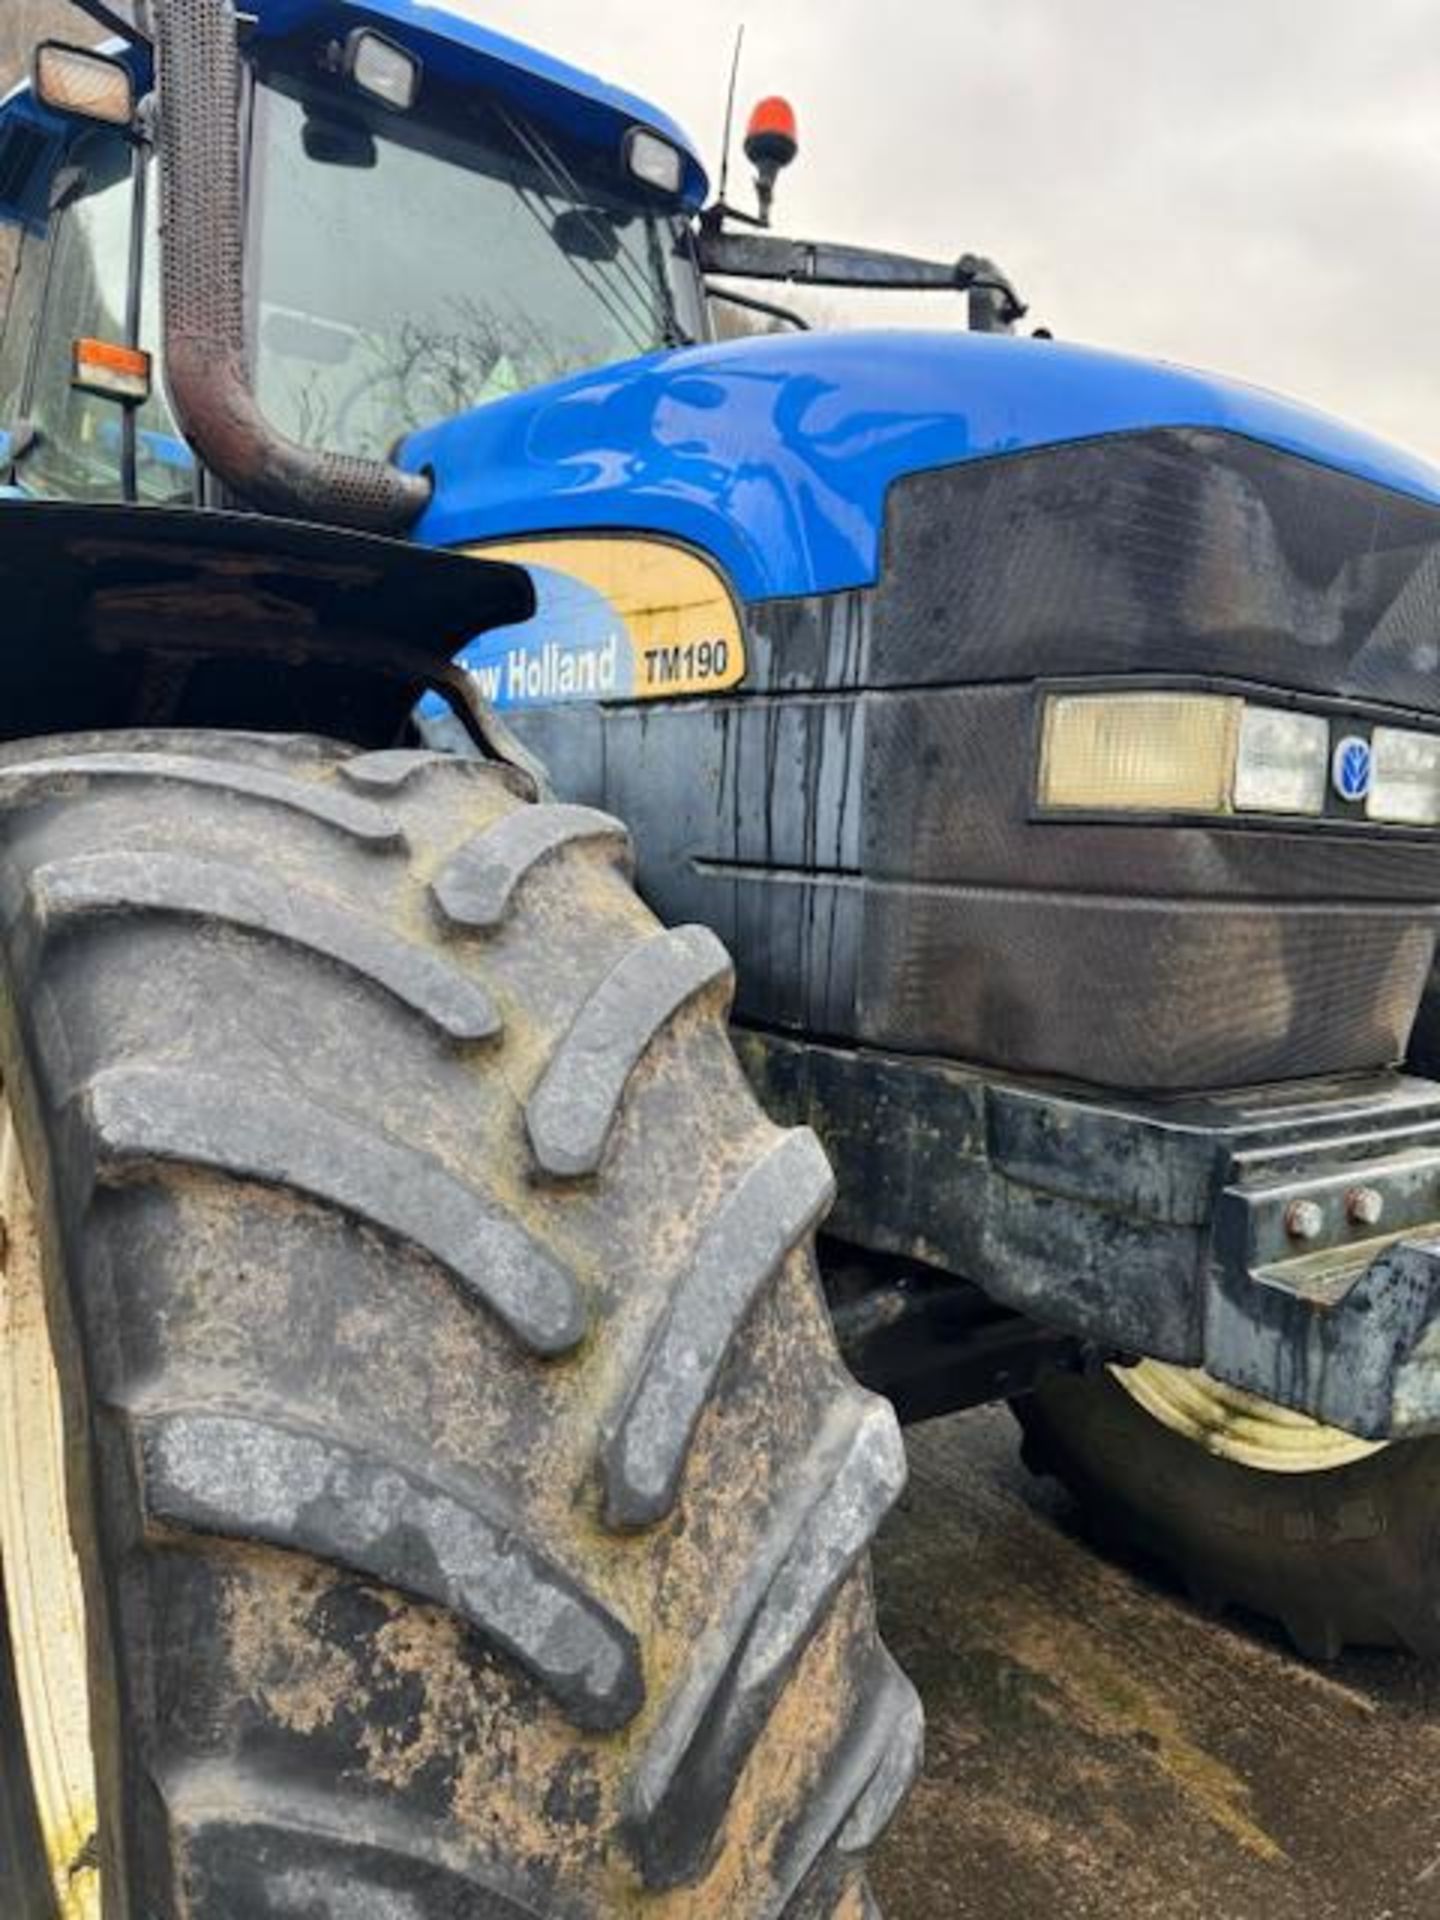 2003 NEW HOLLAND TM190 TRACTOR